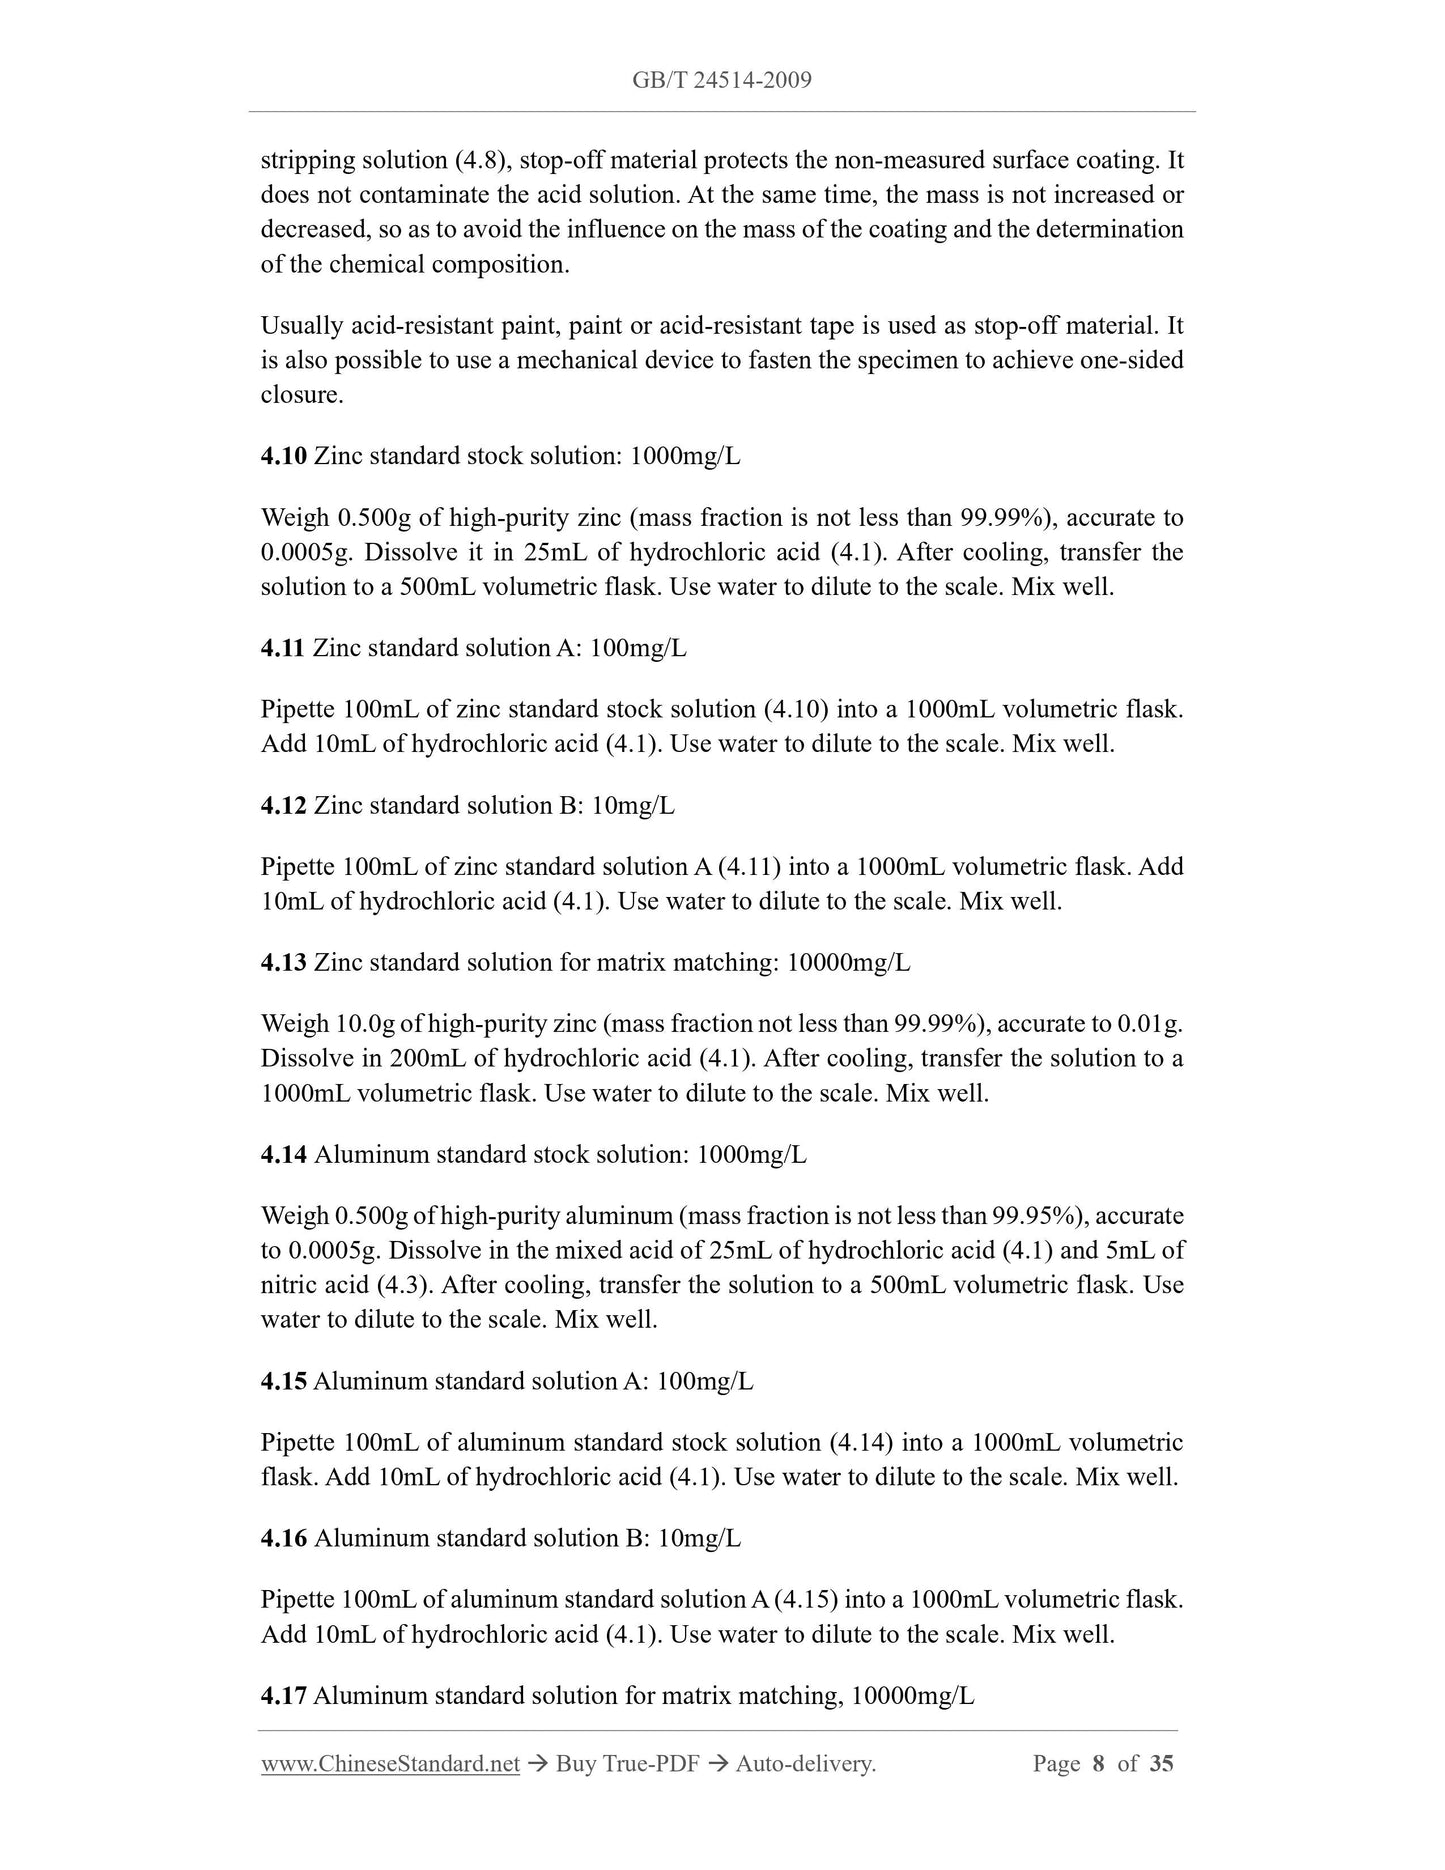 GB/T 24514-2009 Page 5